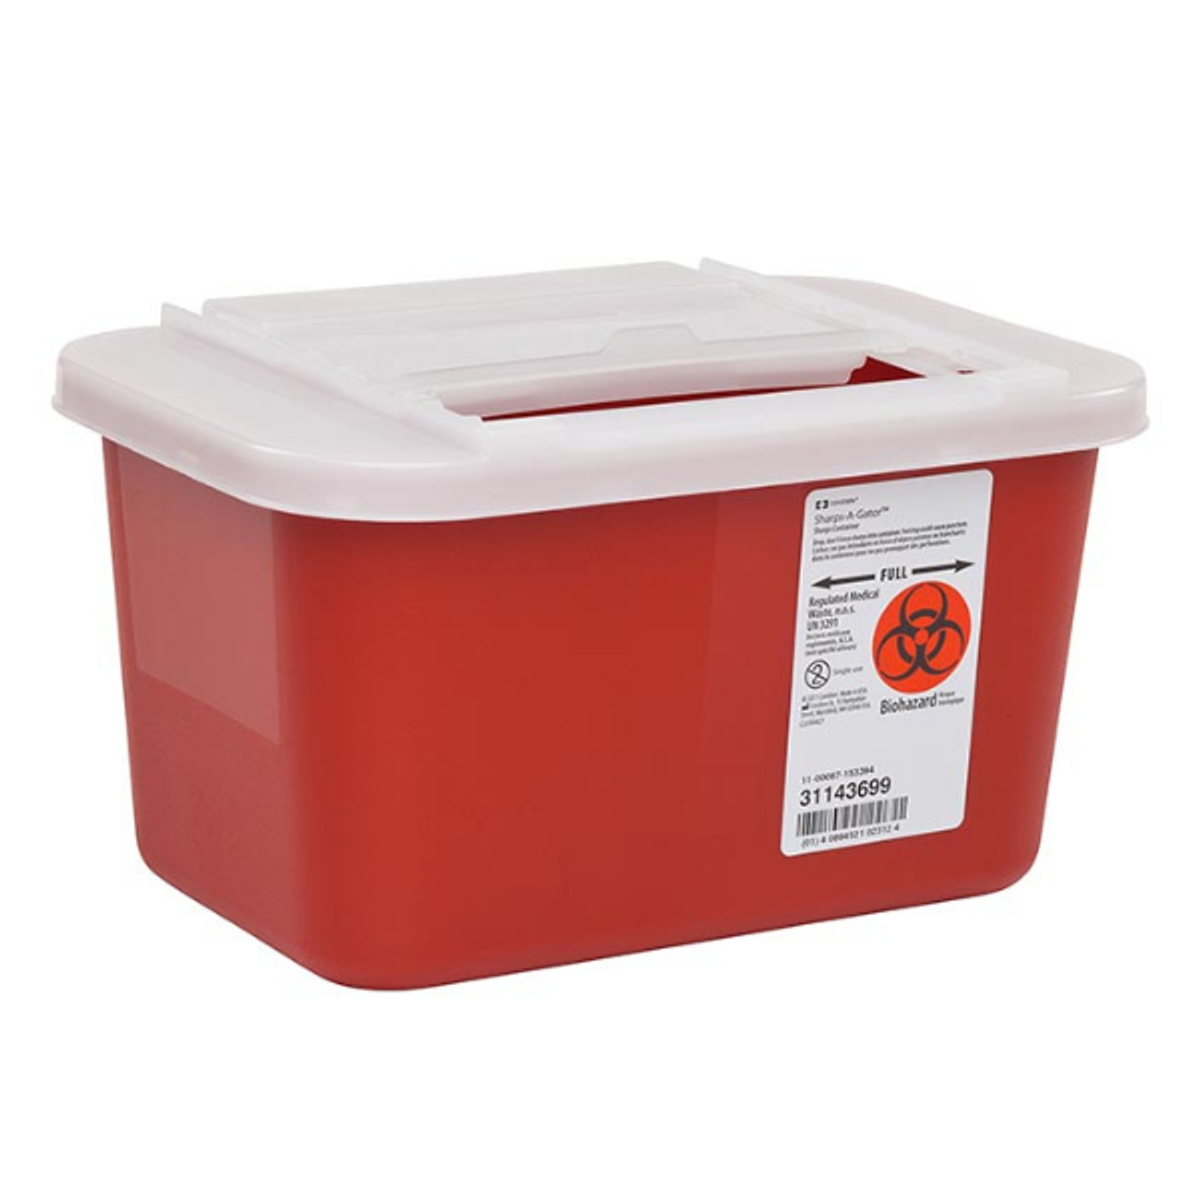 Cardinal Health Monoject Multi-Purpose Sharps Containers with Sliding Lid